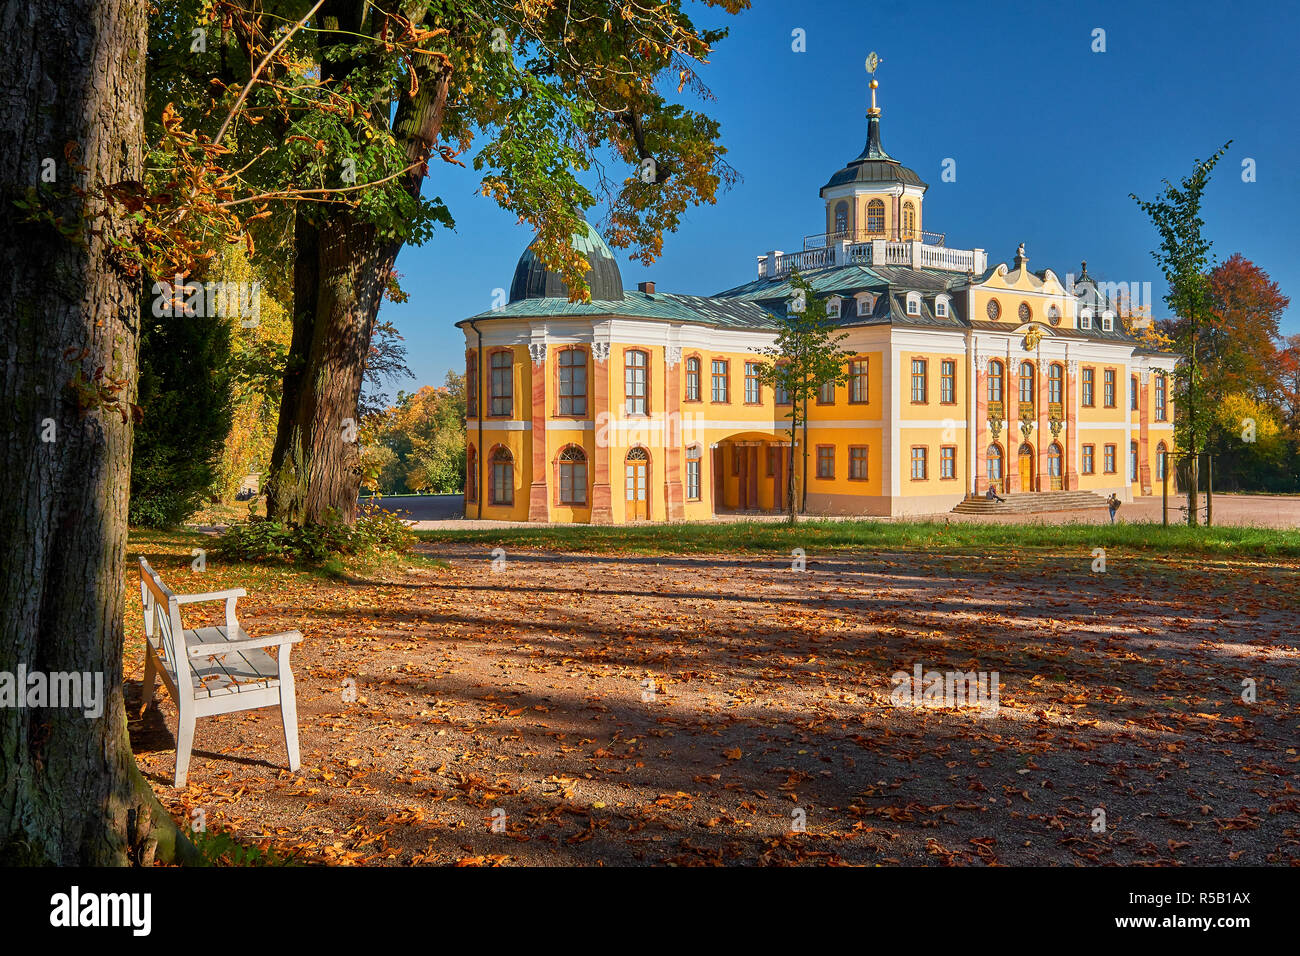 Castle Belvedere, Weimar, Thuringia, Germany Stock Photo